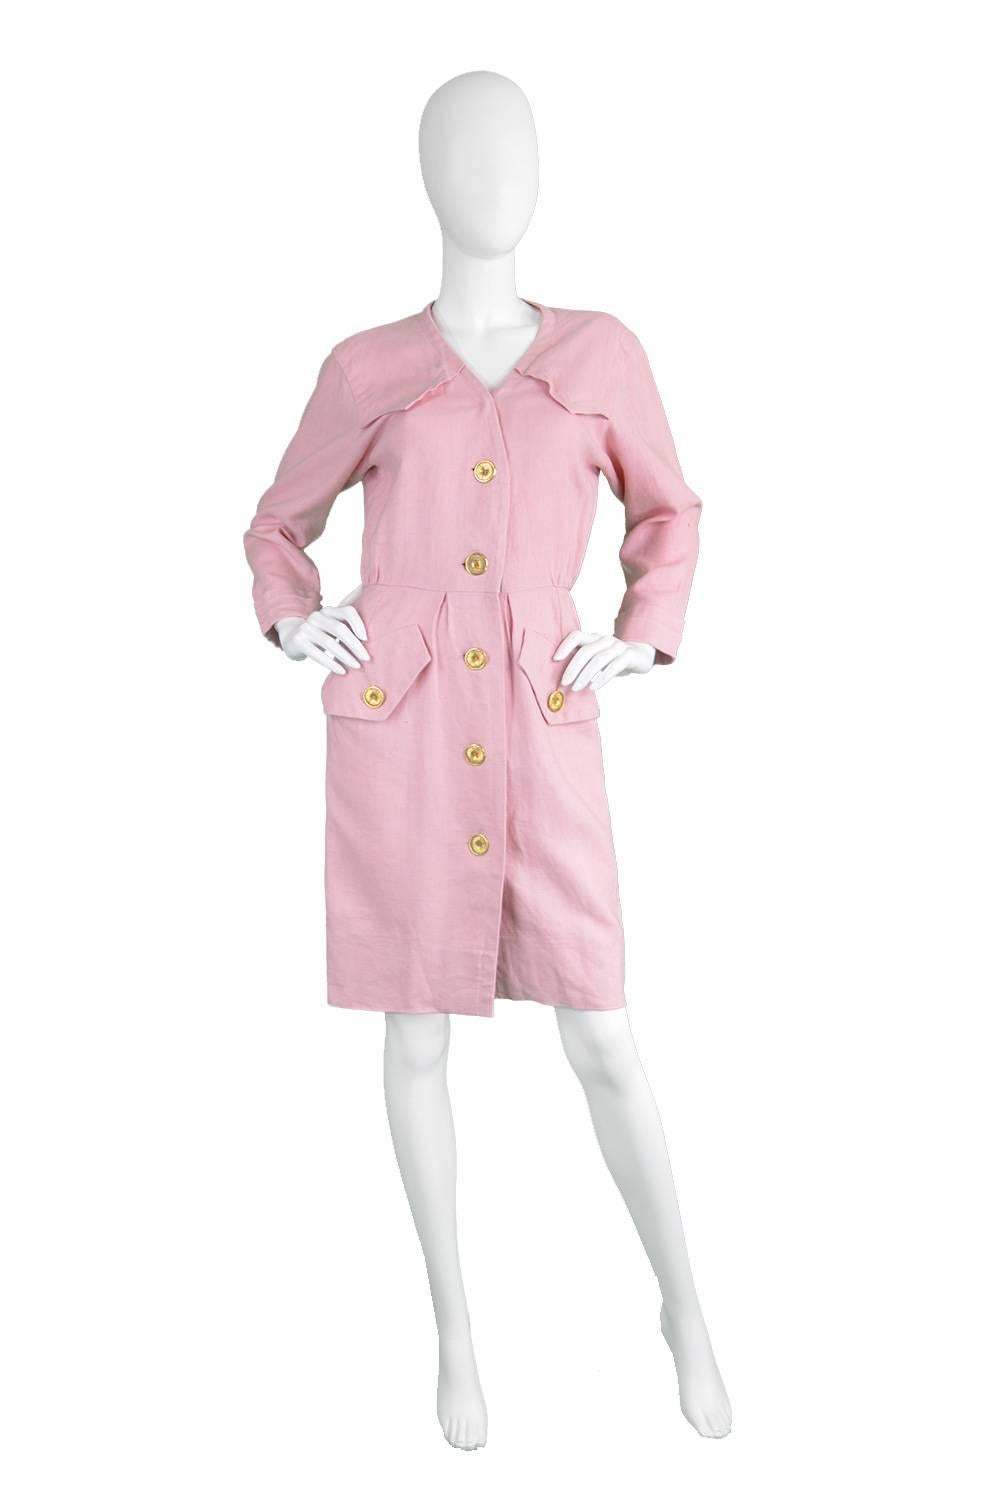 A chic and sophisticated vintage Yves Saint Laurent dress from the 1980s in a baby pink linen, which gives incredible structure and drape. With shoulder details that match the pockets, giving an almost safari style inspiration, but in a feminine